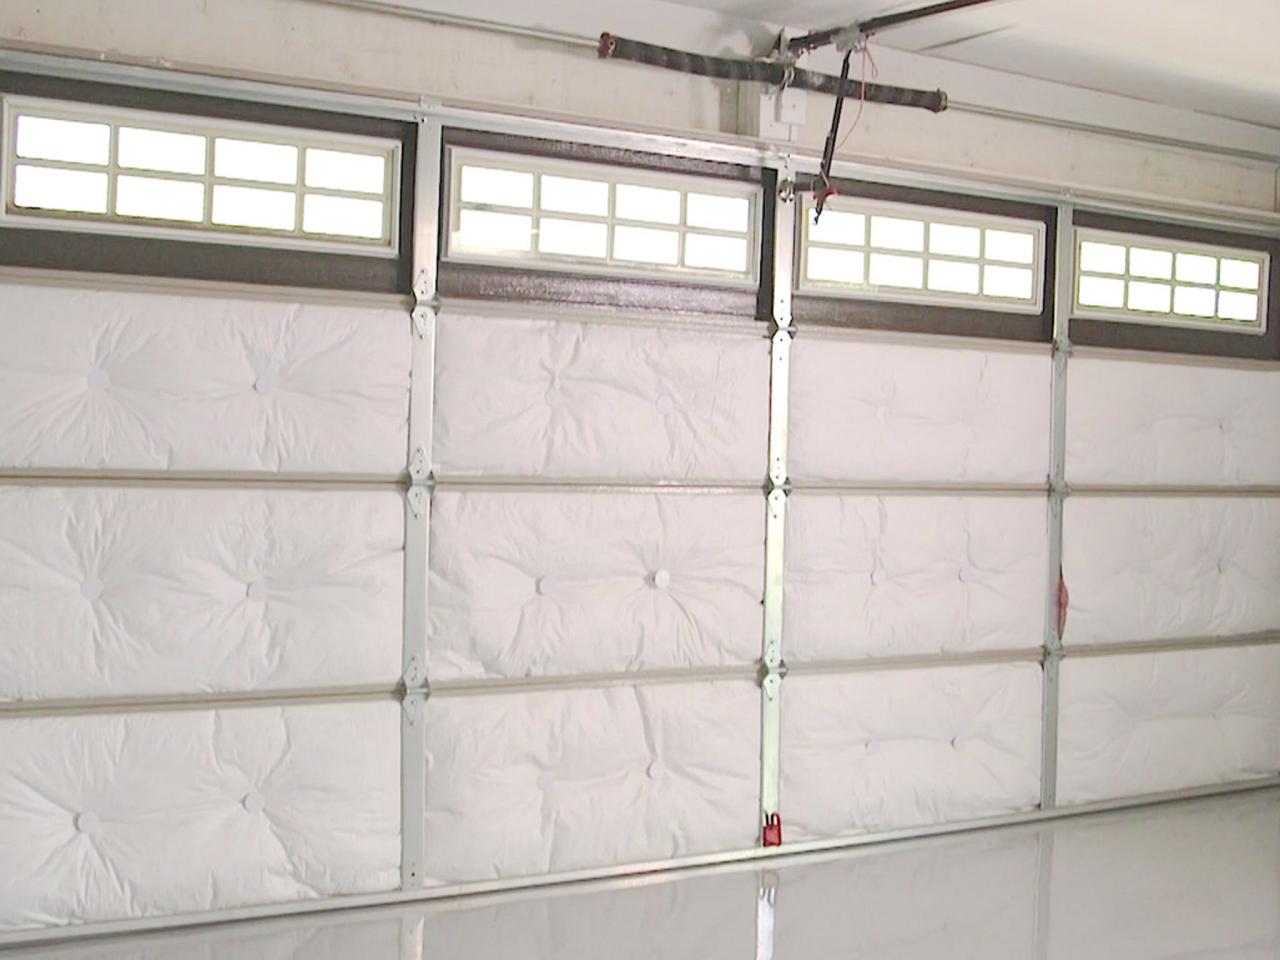 How to insulate a garage door to reduce noise? 2